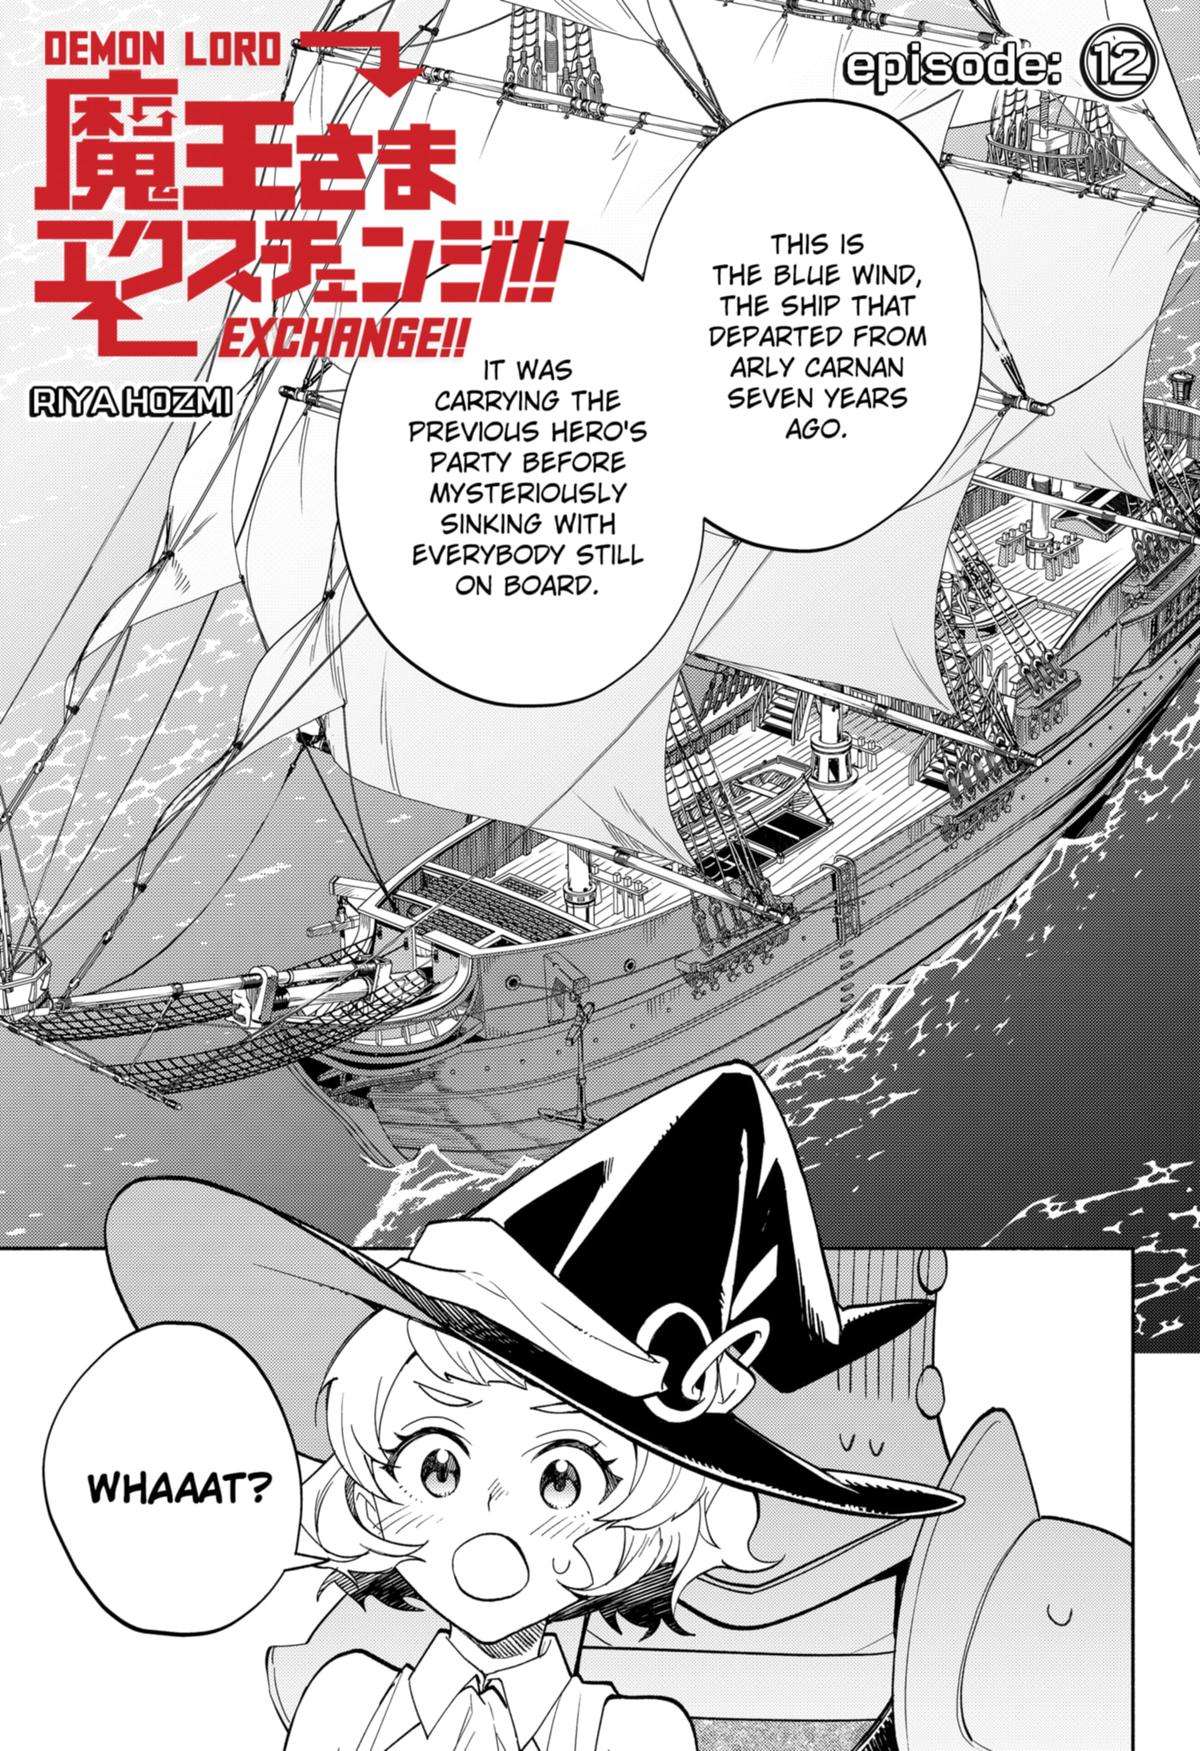 Demon Lord Exchange!! - chapter 12 - #1